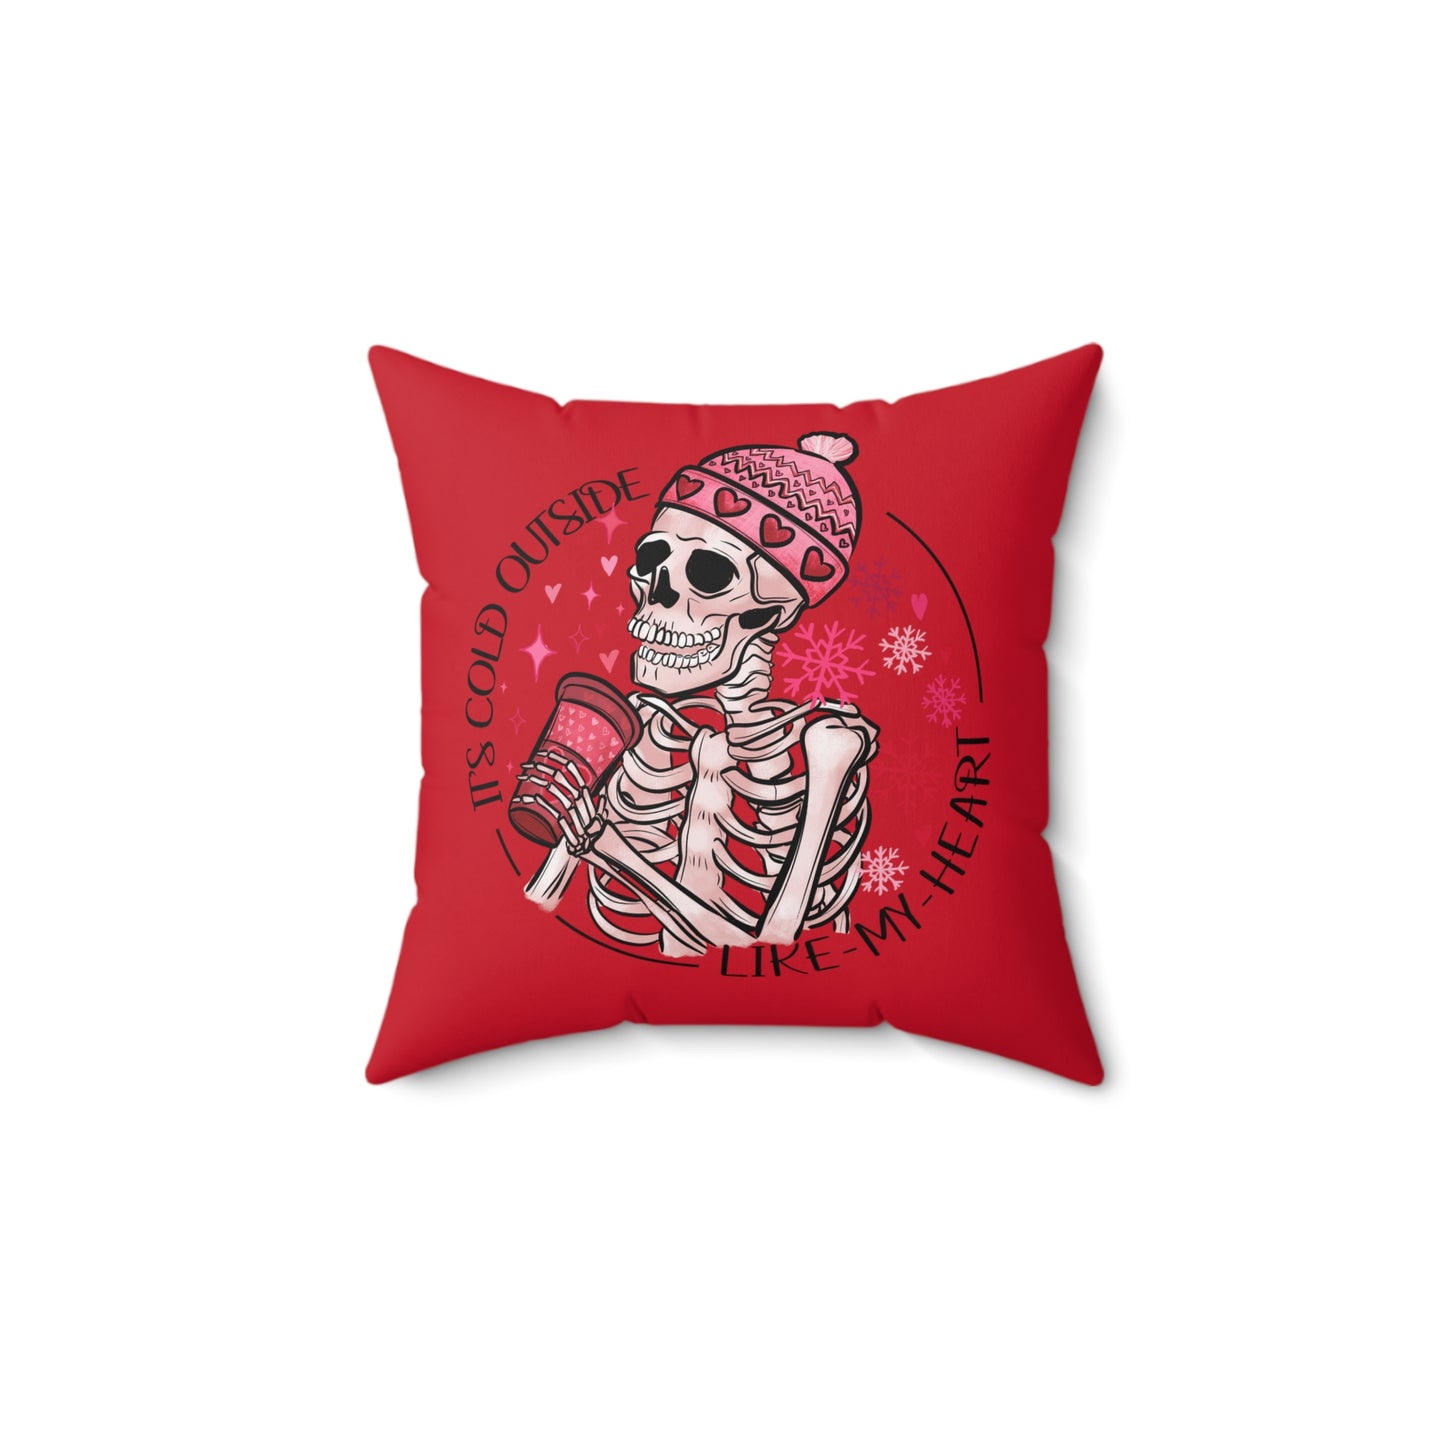 Valentine Skeleton Throw Pillow, Coffee Skeleton Red Throw Pillow Cover, Pillow for Couch,